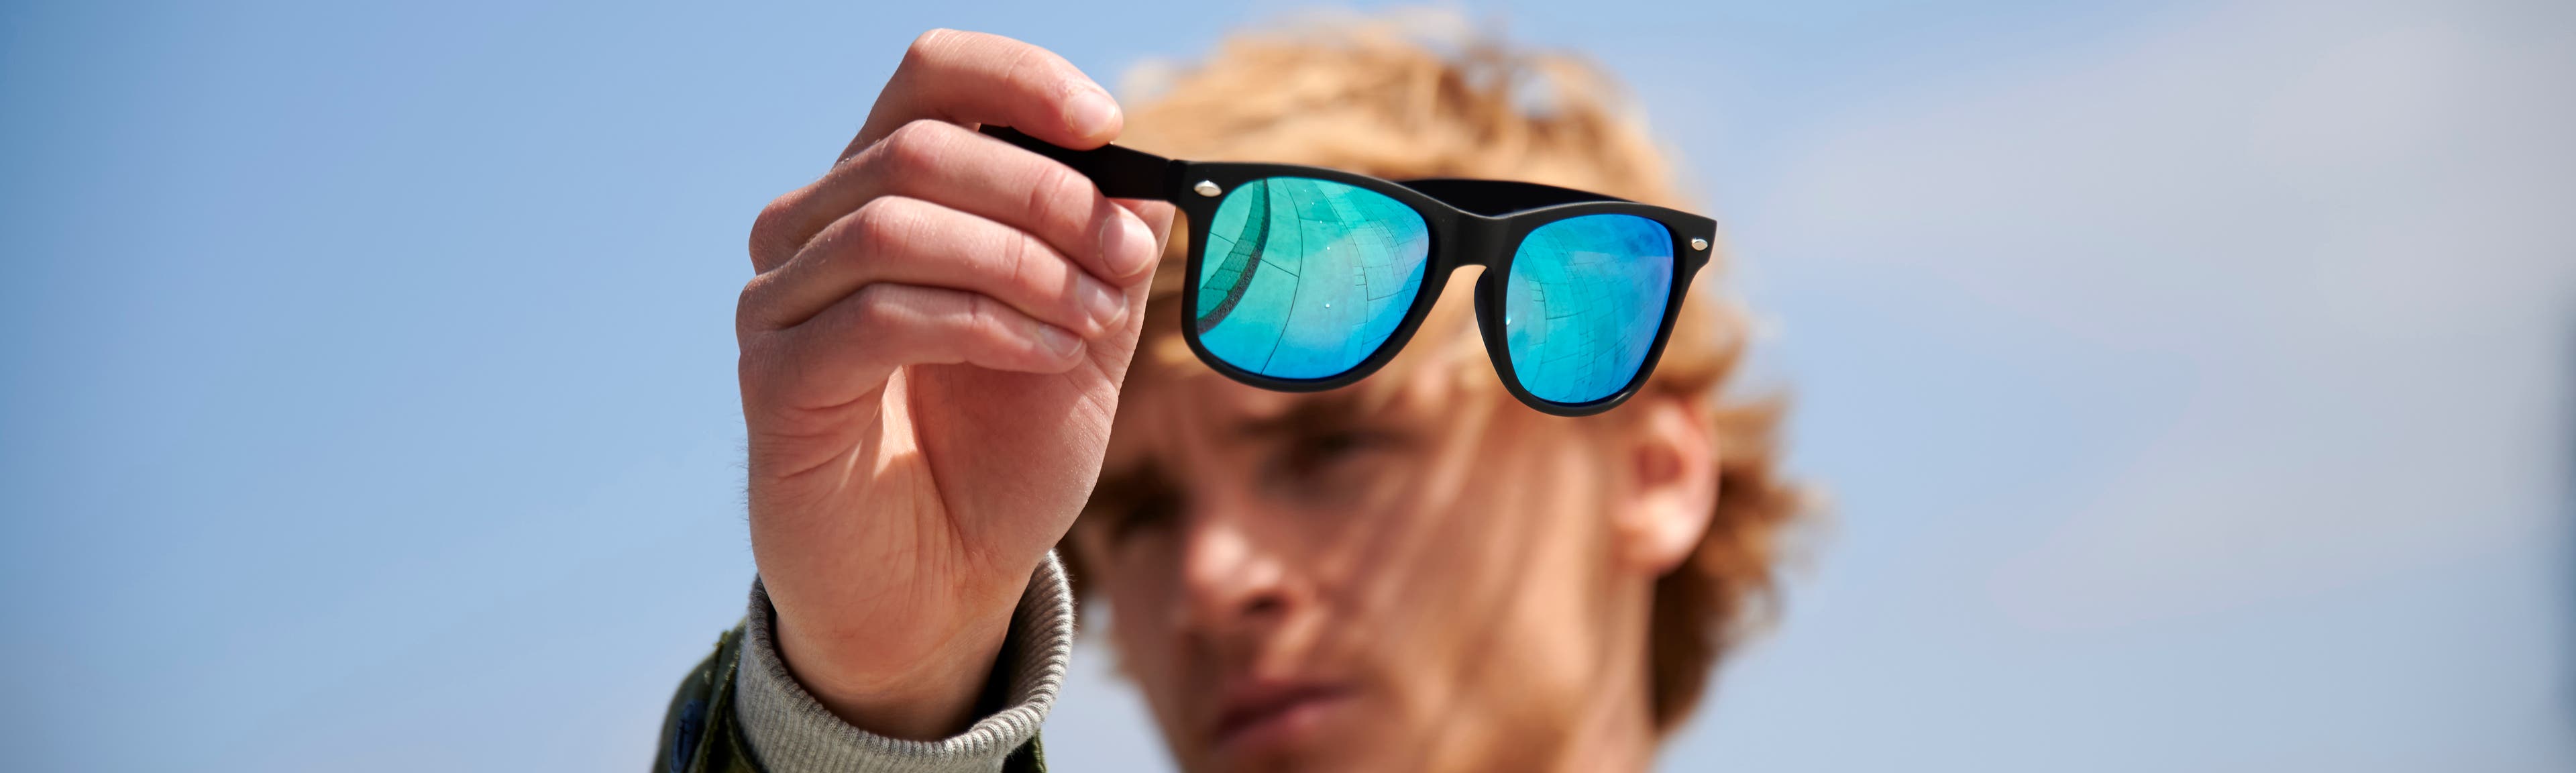 Sunglasses – Protect Your Eyes from the Sun